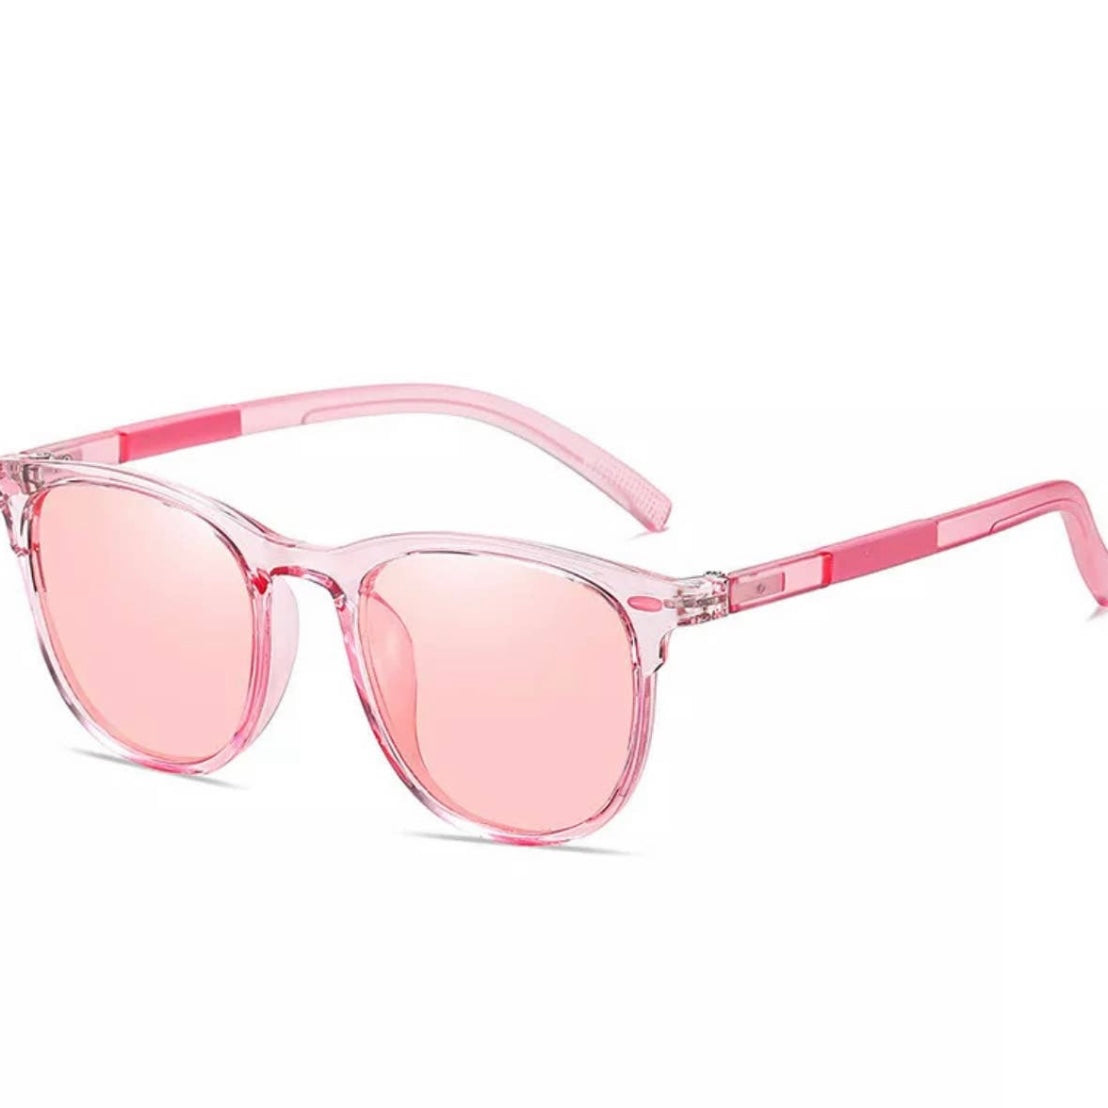 Colored Child Sunglasses- Pink/Pink